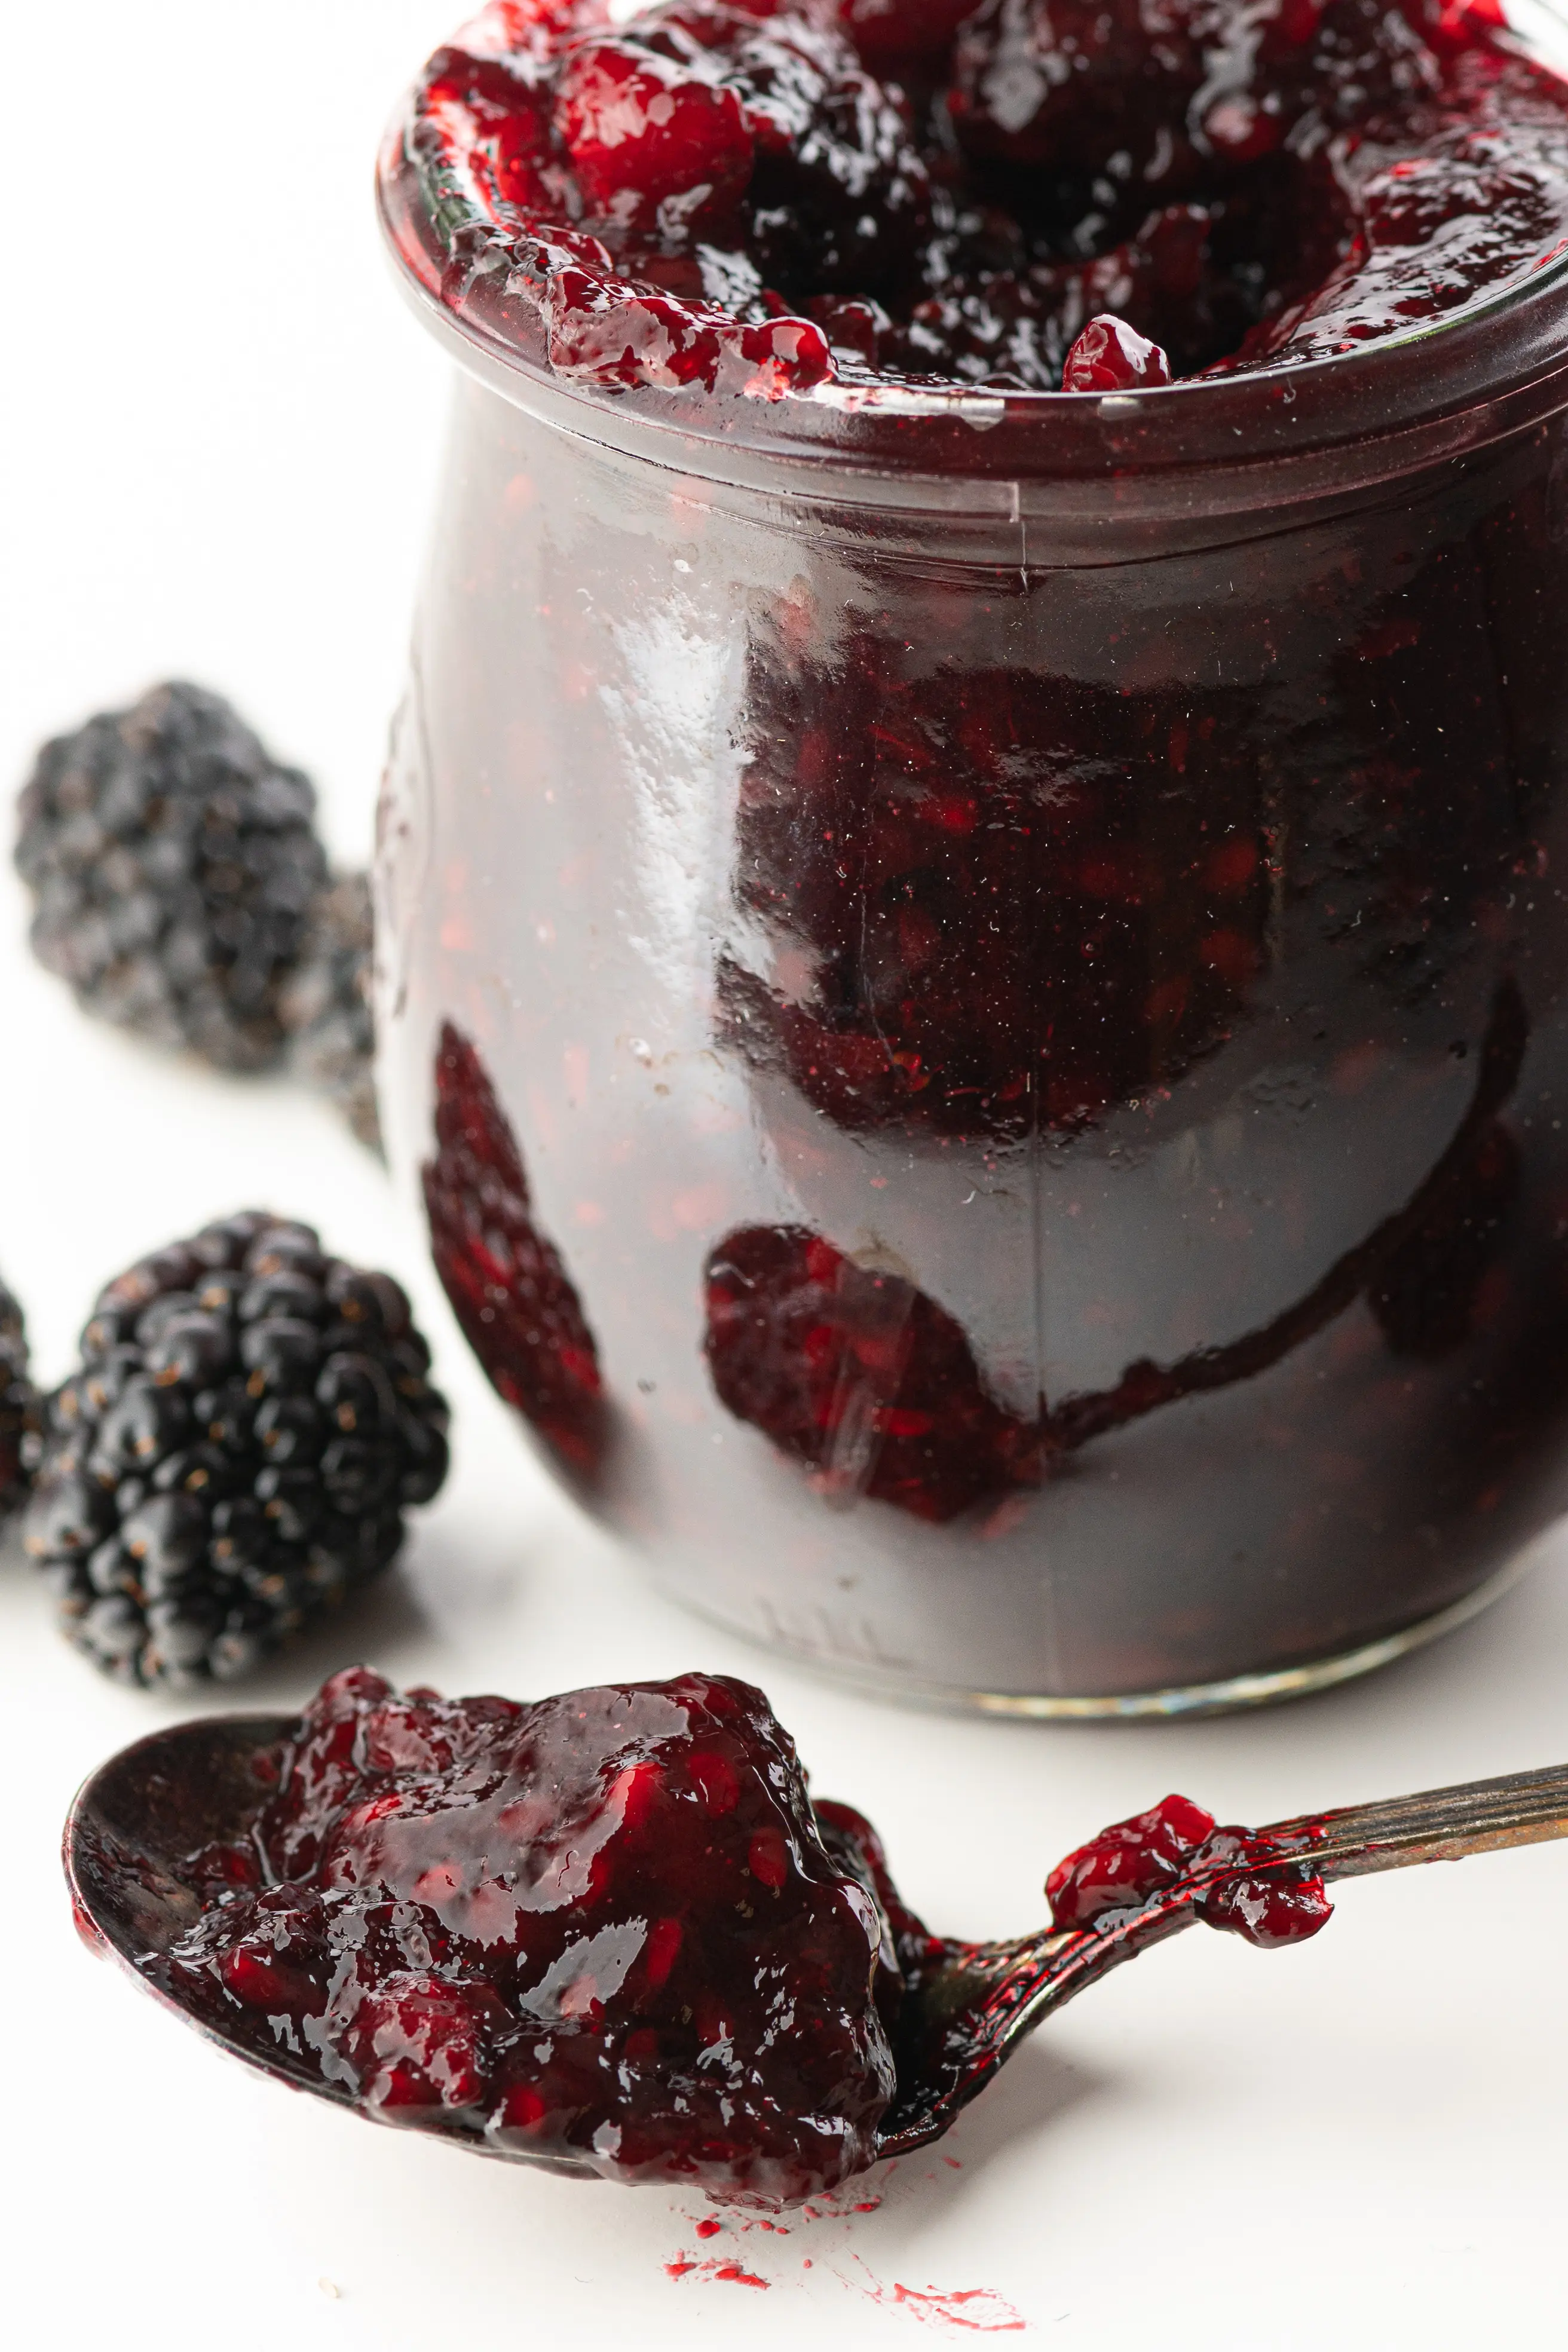 A jar of sugar-free blackberry jam, with a spoonful sitting beside them.